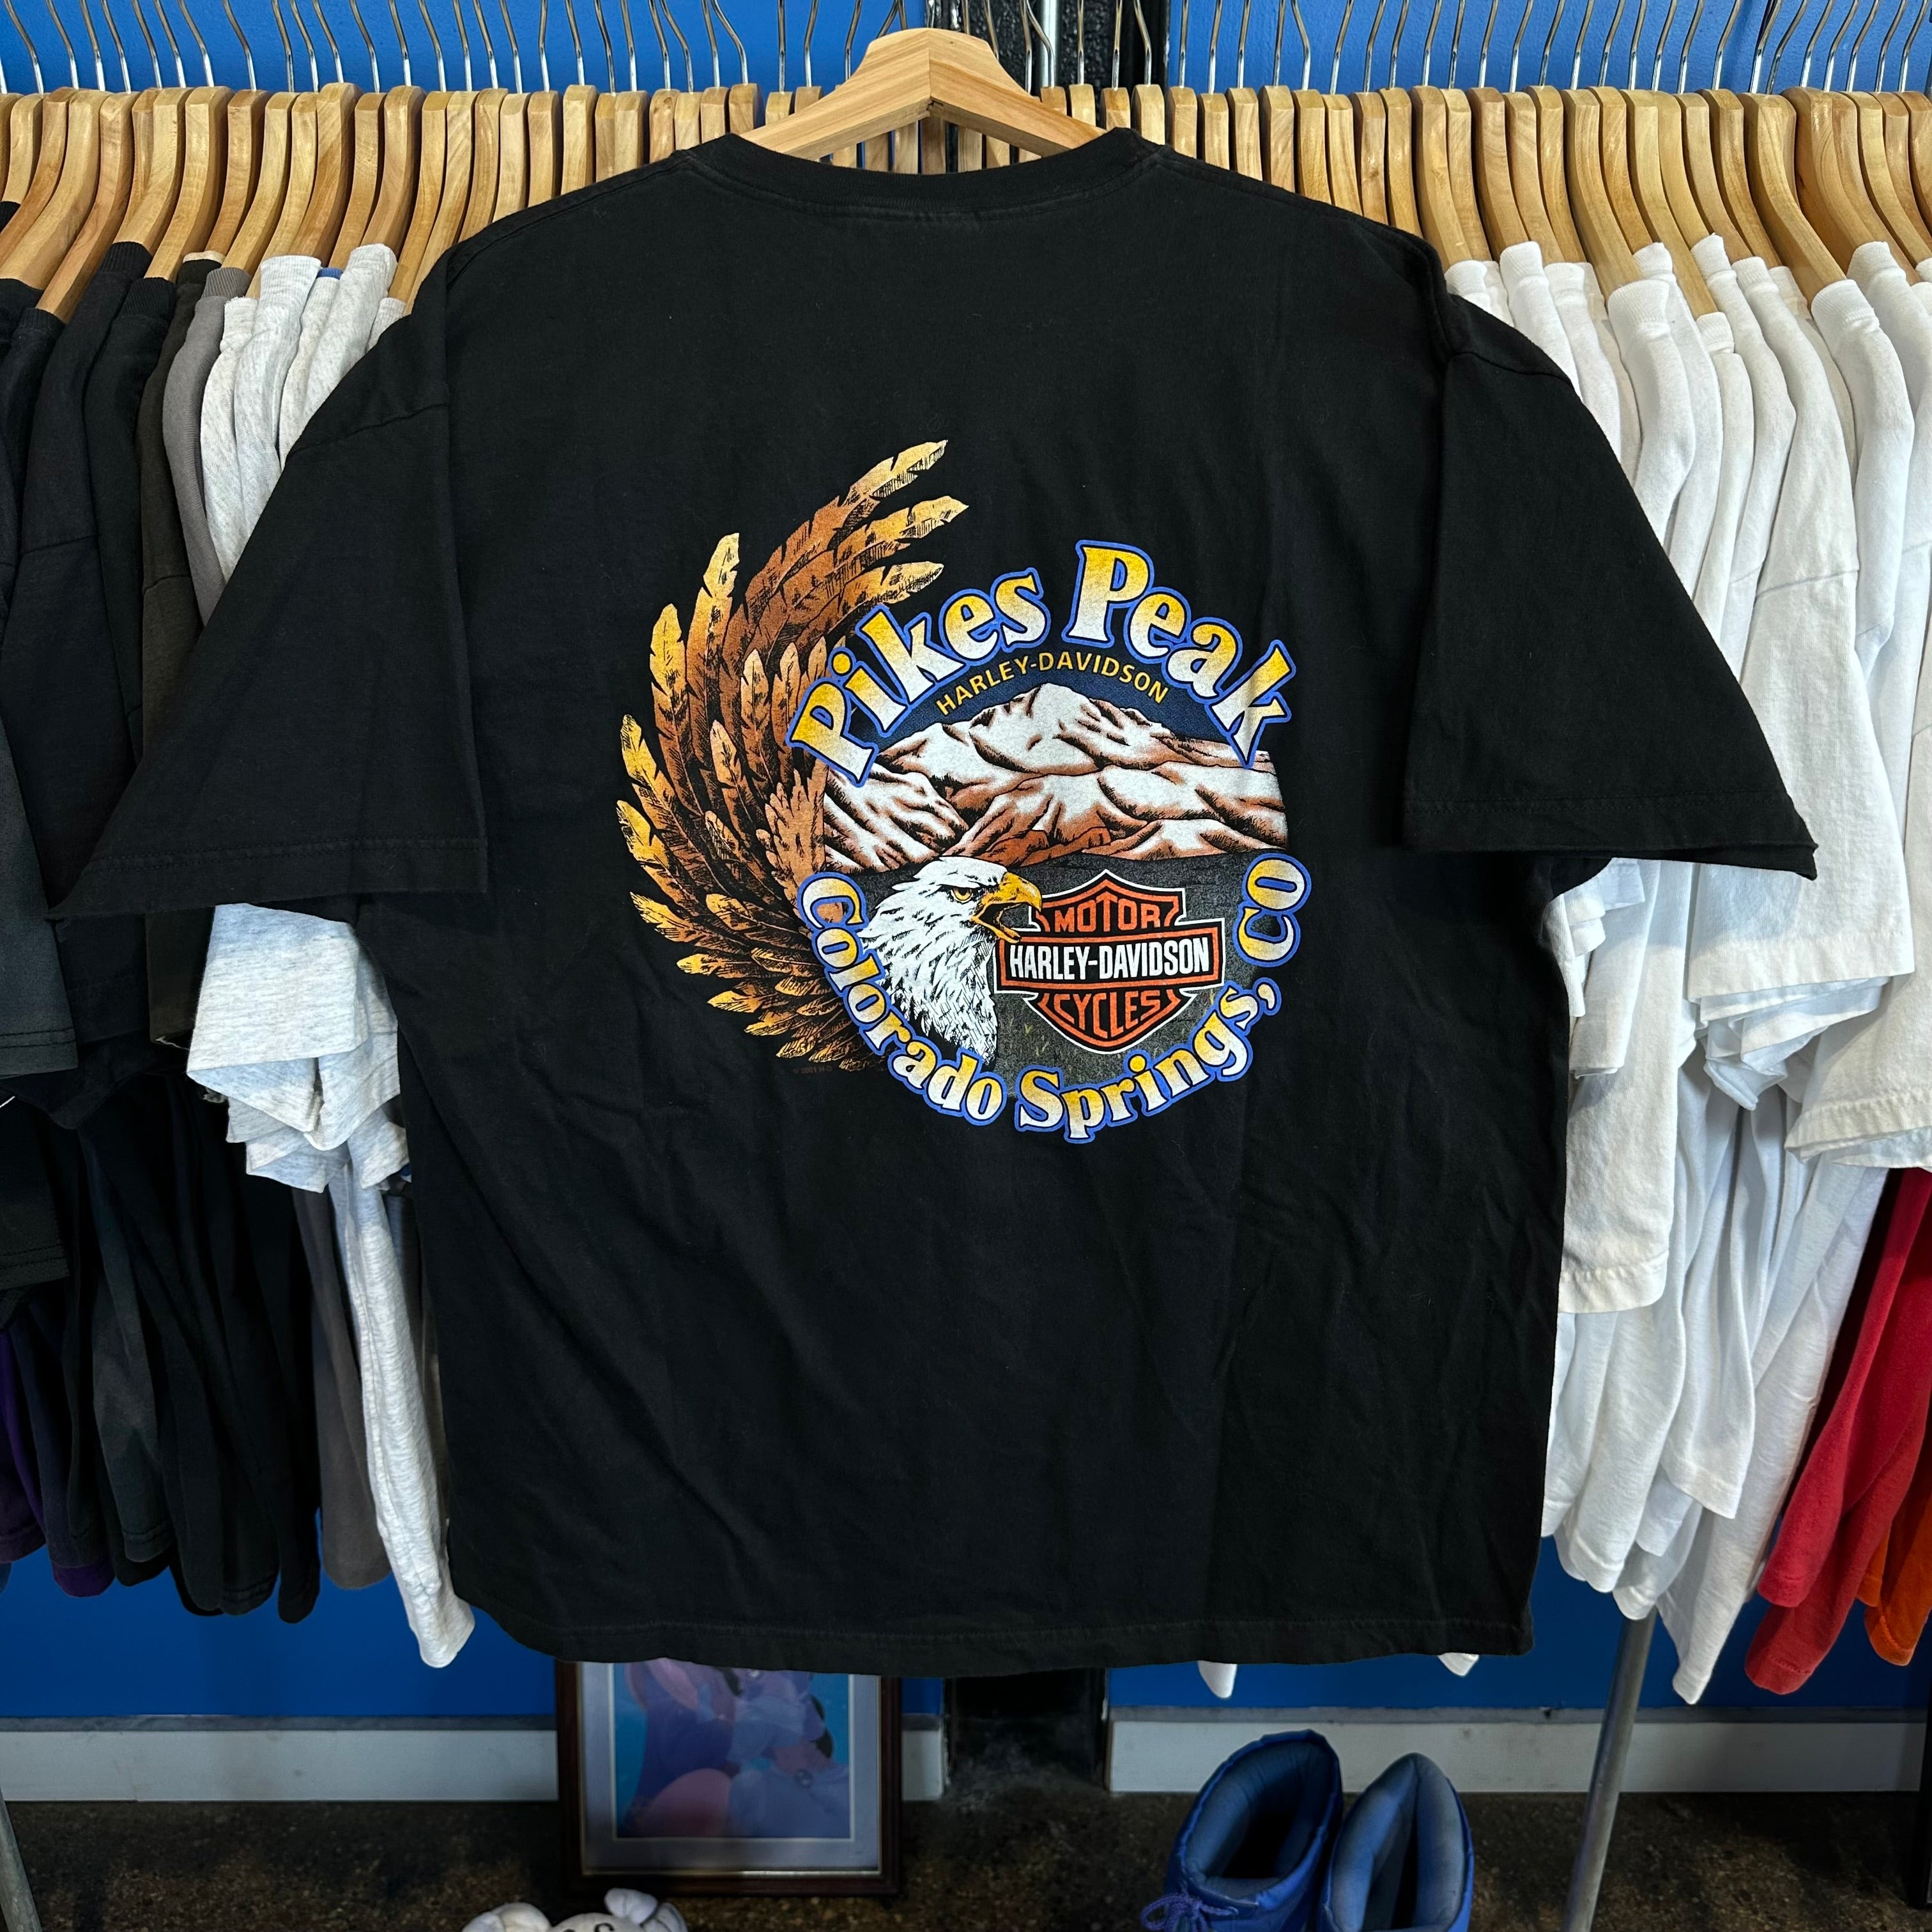 Harley Davidson Flame Spellout Colorado Springs, CO T-Shirt